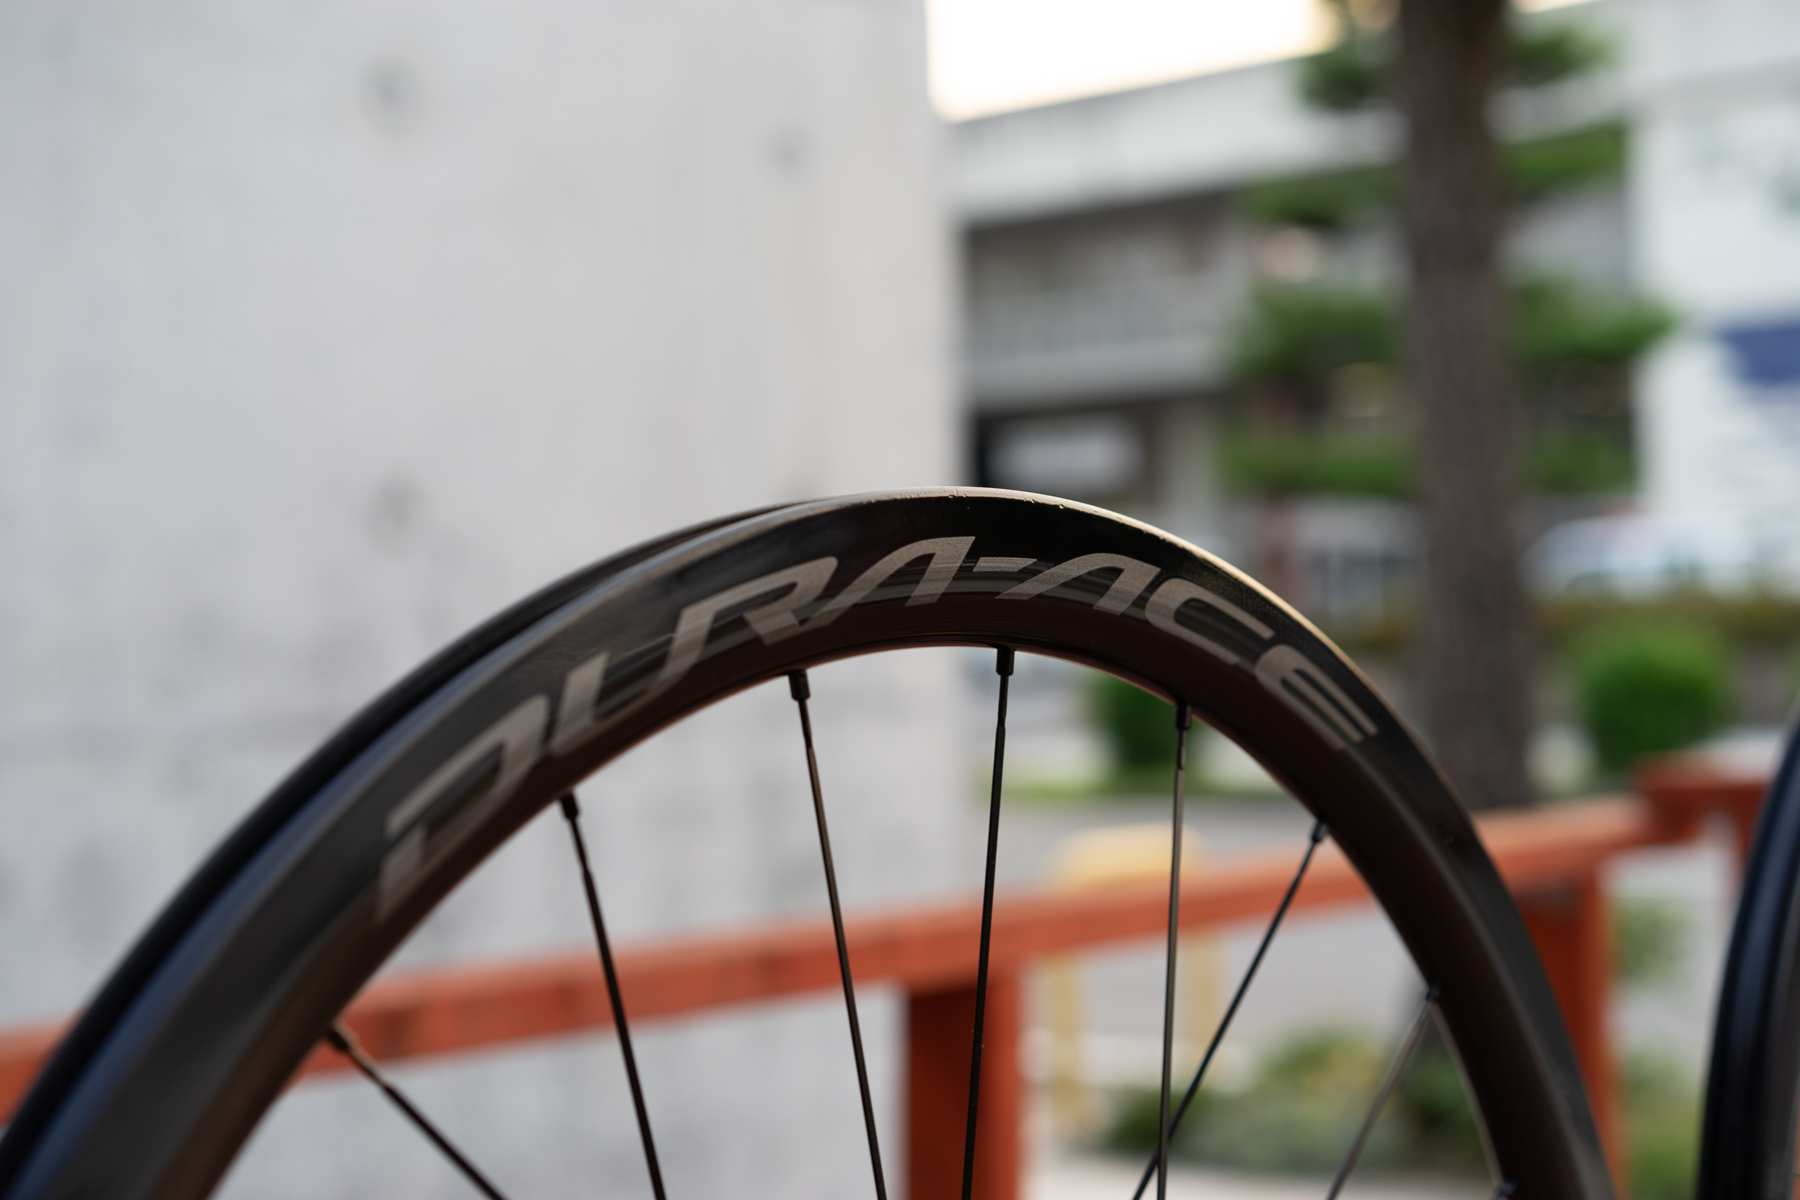 dura-ace wh-r9100 c40 cl リムブレーキ